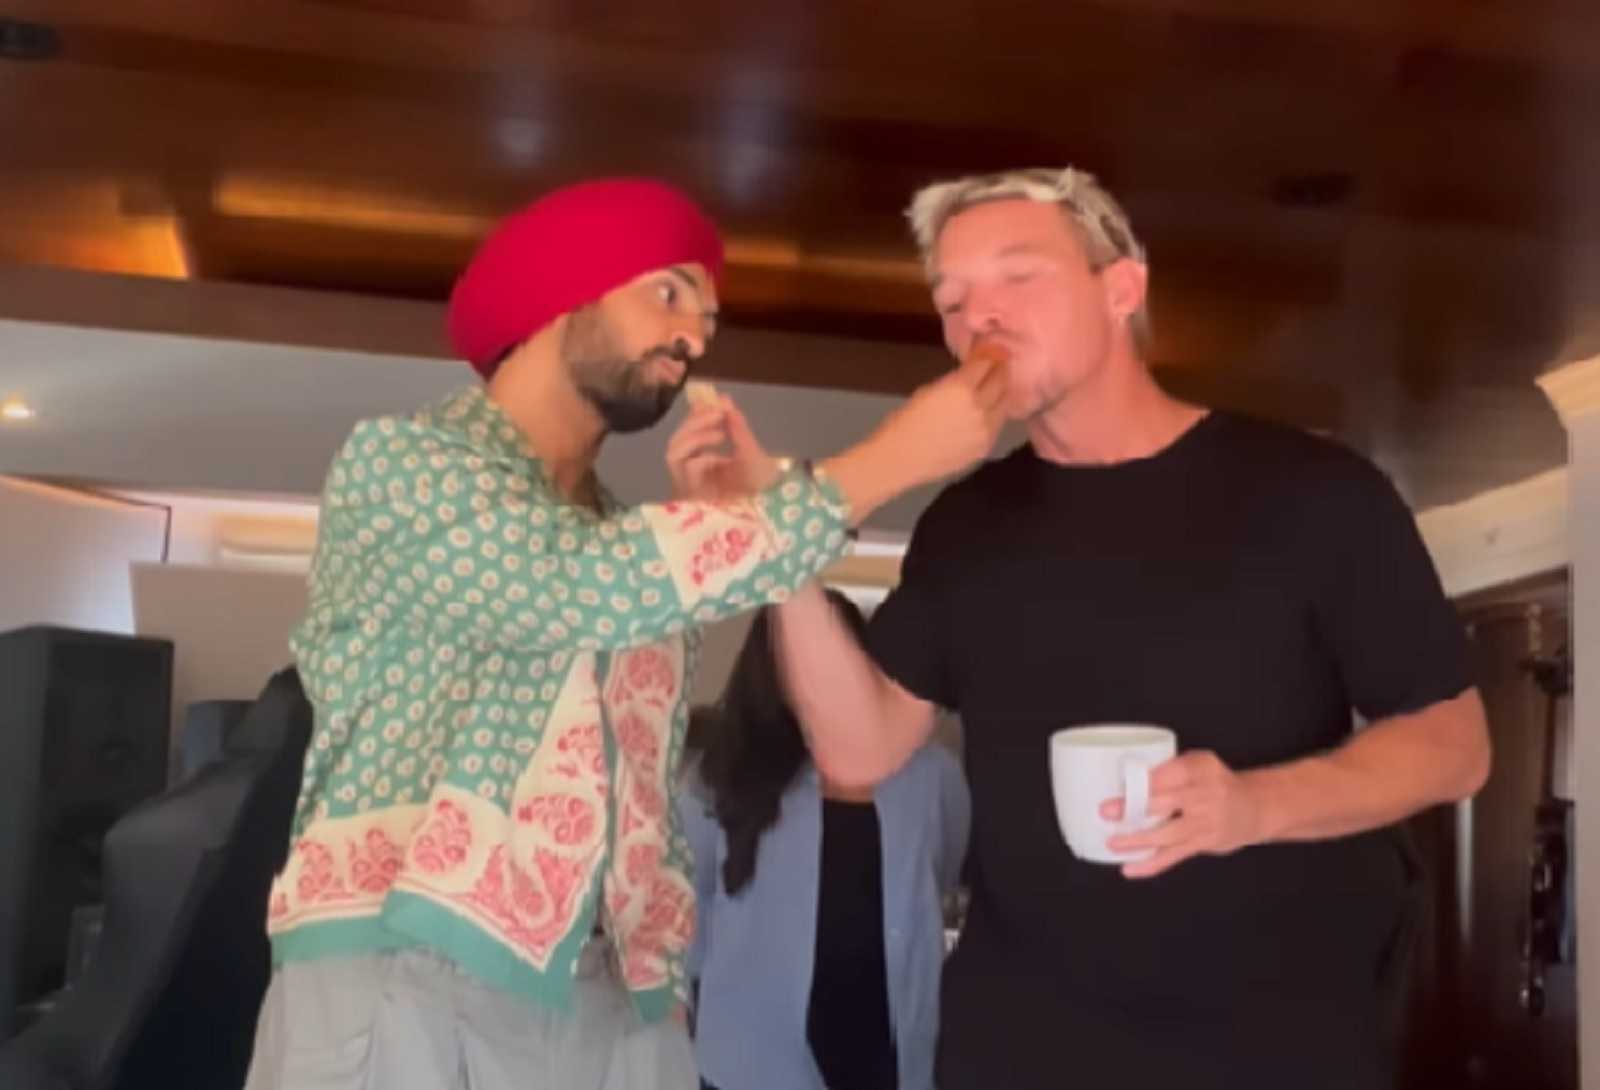 'Kangana might be crying at corner': Diljit Dosanjh and DJ Diplo feed sweets to each other; netizens react